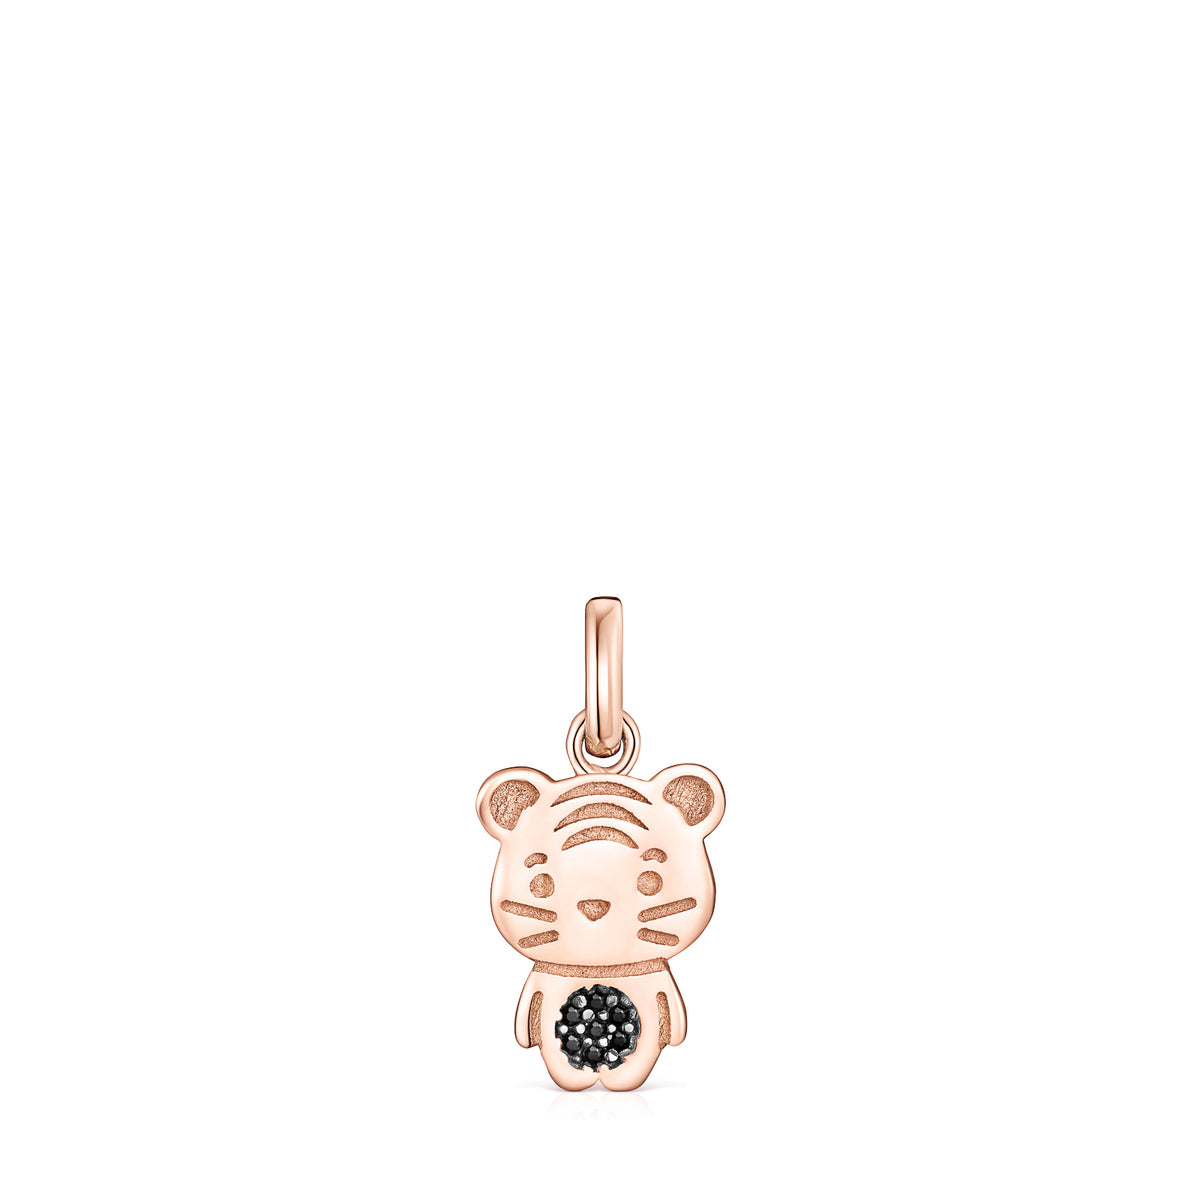 Tous Chinese Horoscope Tiger Pendant in Rose Gold Vermeil with Spinel 918434620